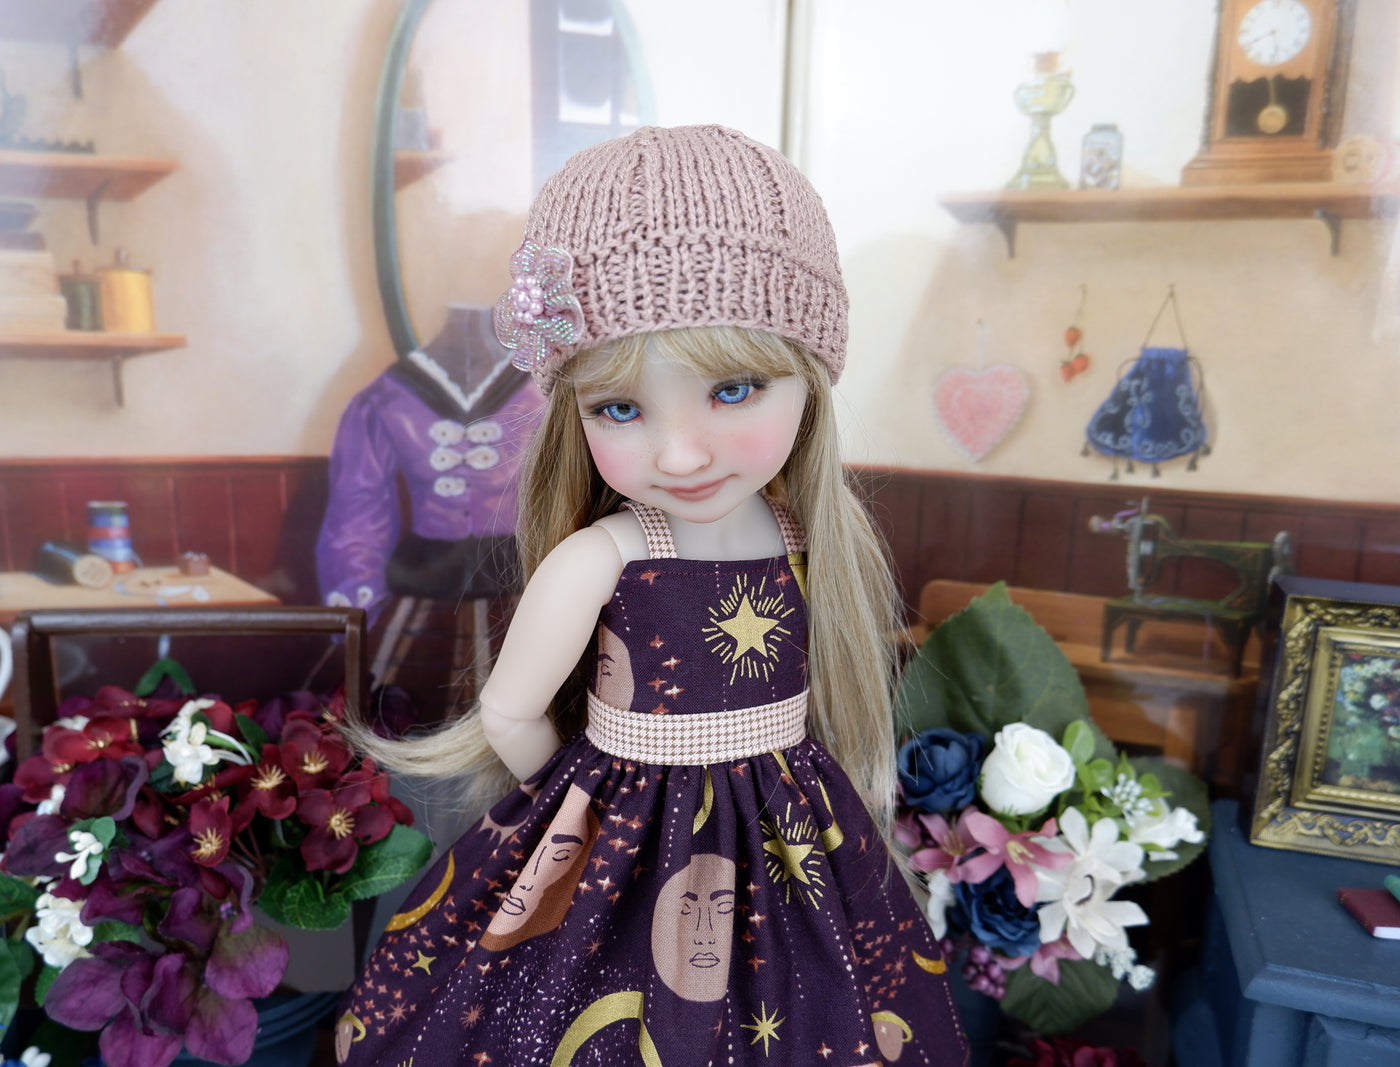 Celestial Beauty - dress and sweater set with boots for Ruby Red Fashion Friends doll